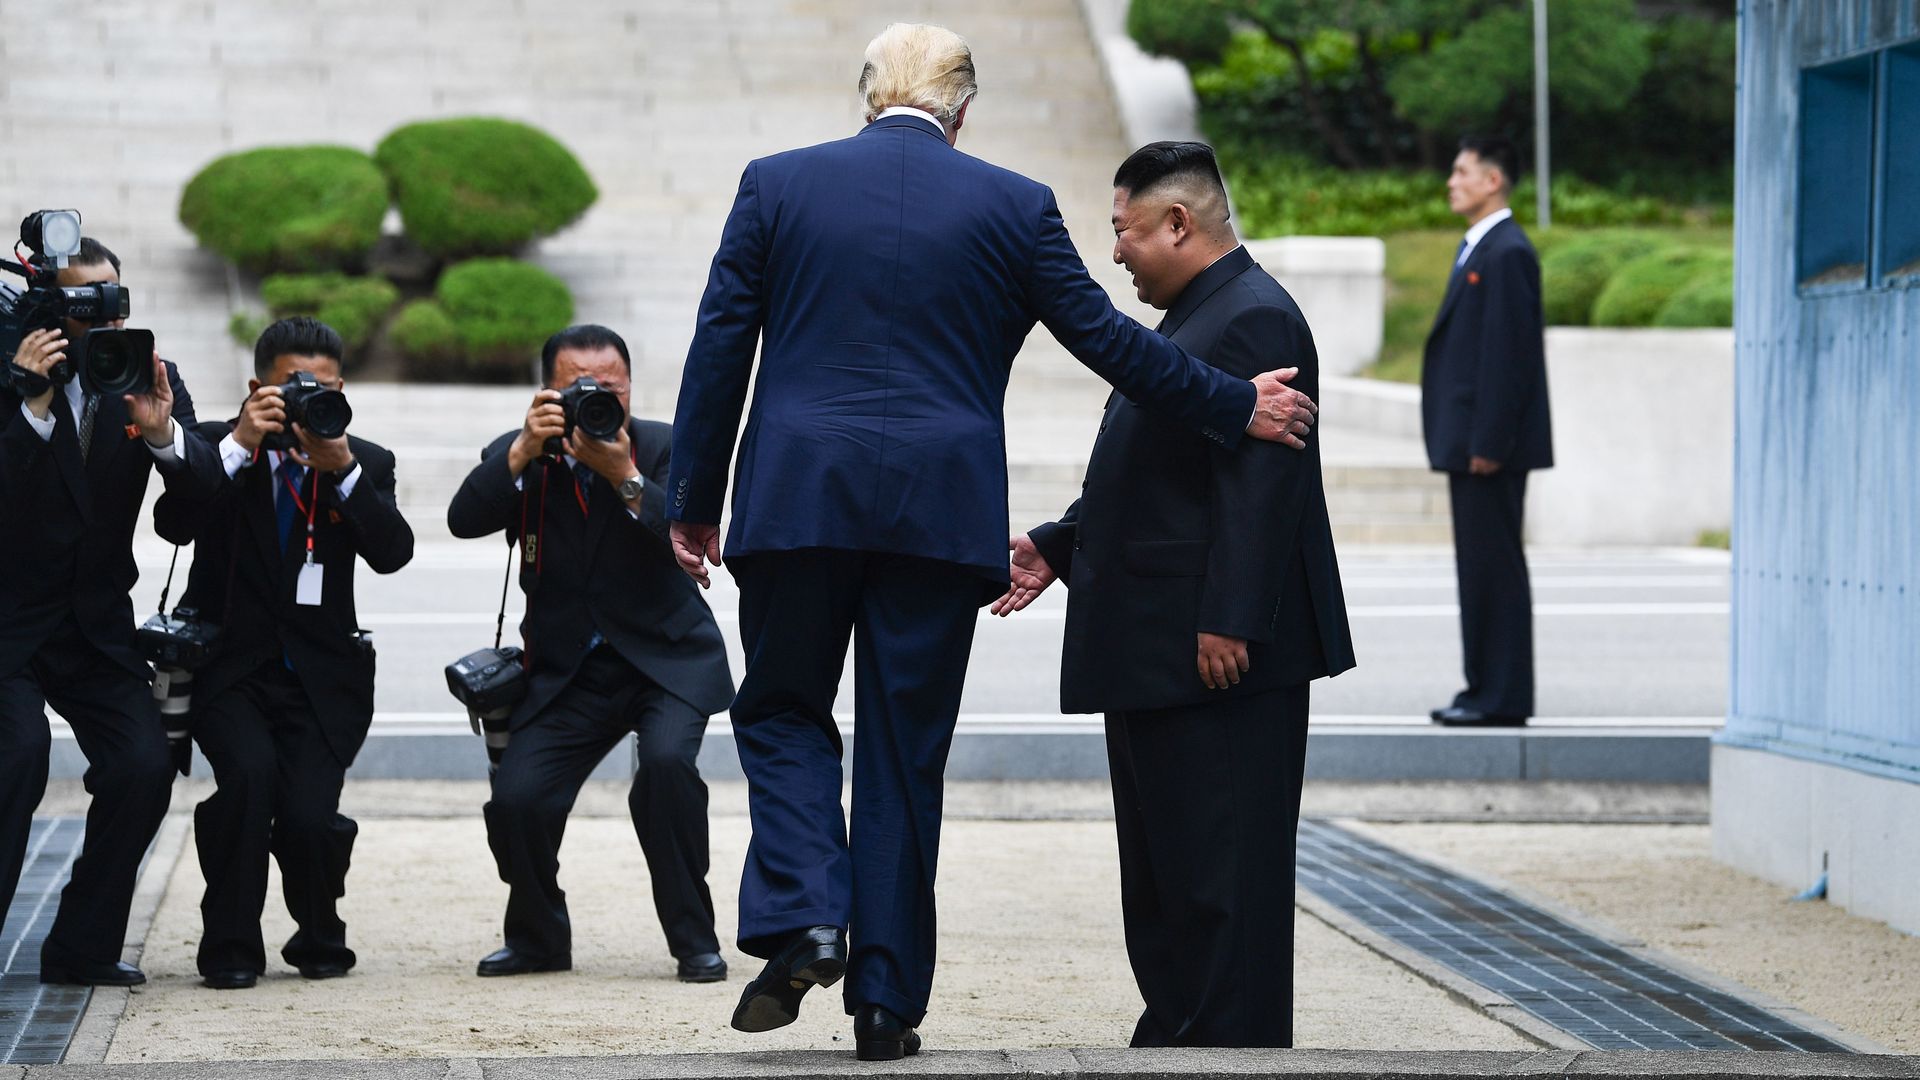 In this image, Trump touches Kim Jong-un's shoulder while walking